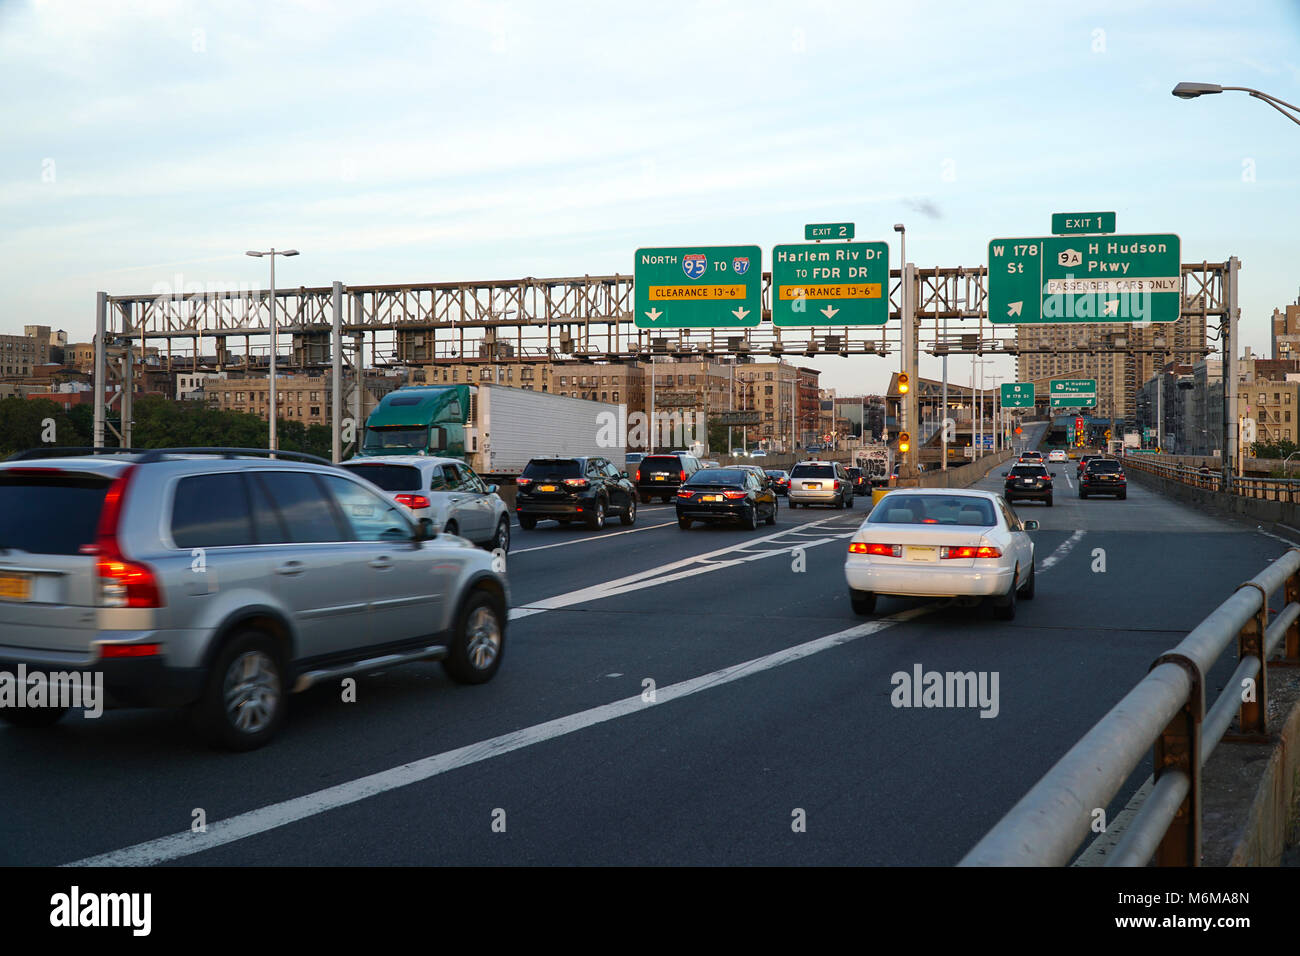 George Washington Bridge traffic crosses into New York from New Jersey across famous structure. Heavy commuter traffic passes interstate signage to di Stock Photo